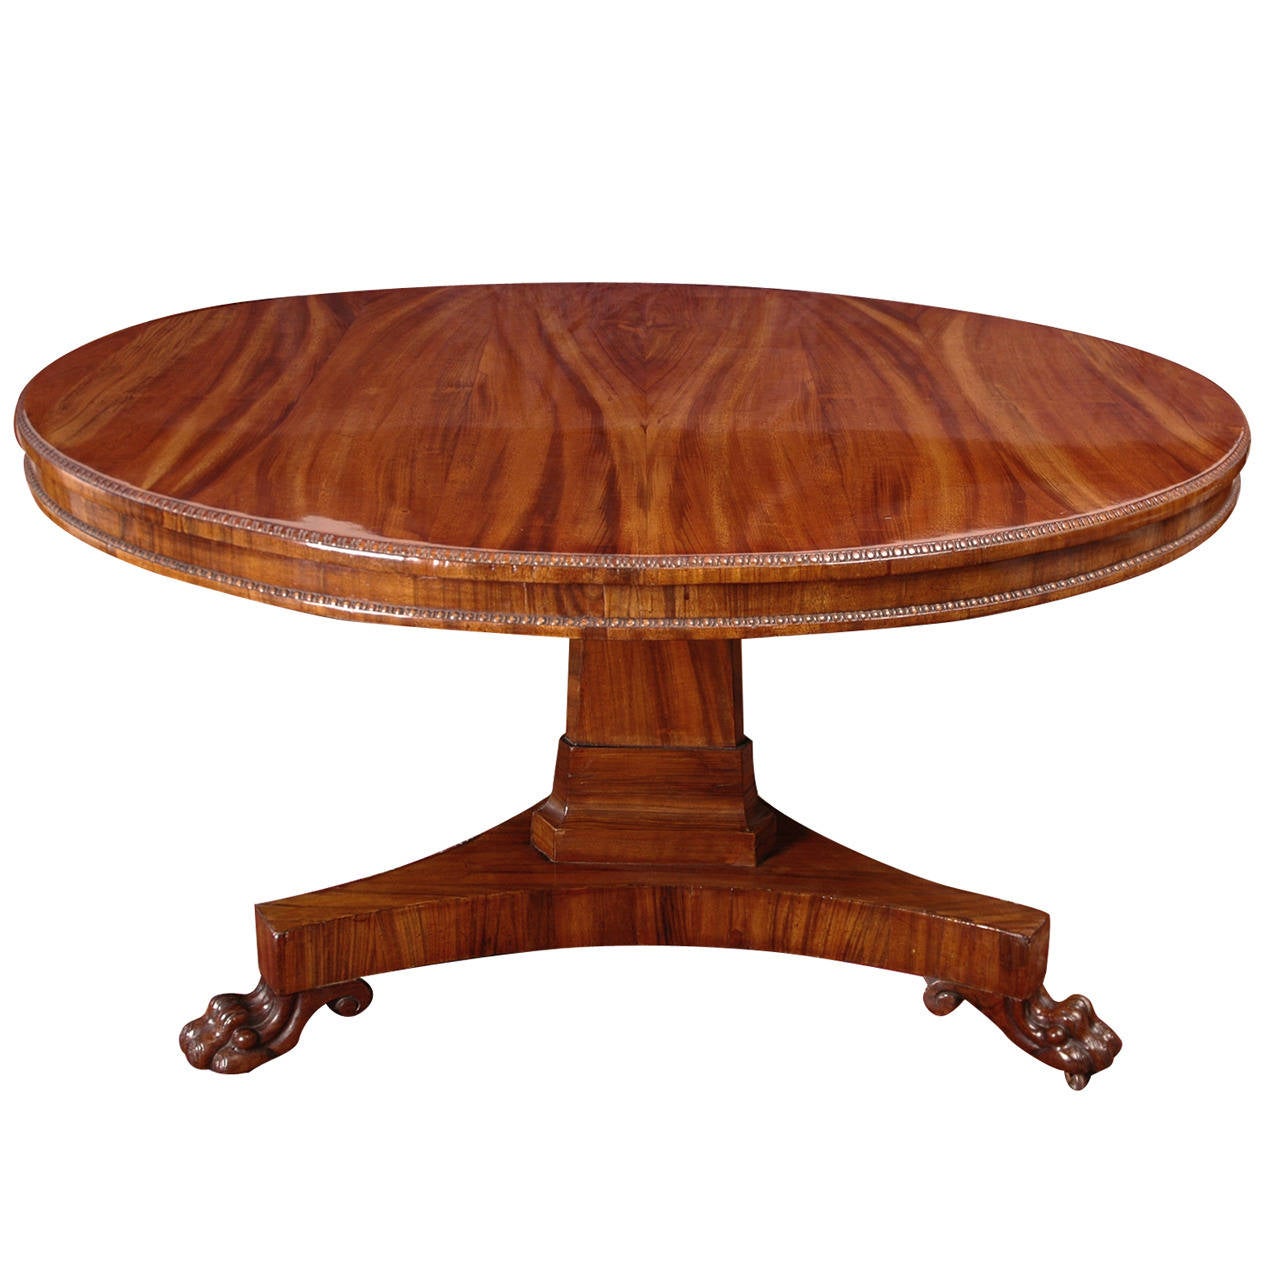 An exceptional English Regency tigerwood table with round top over tripod base with carved lions' paw feet. Offers an ideal neoclassical center hall table or intimate dining or breakfast table. The tripod base makes it easier to assemble chairs